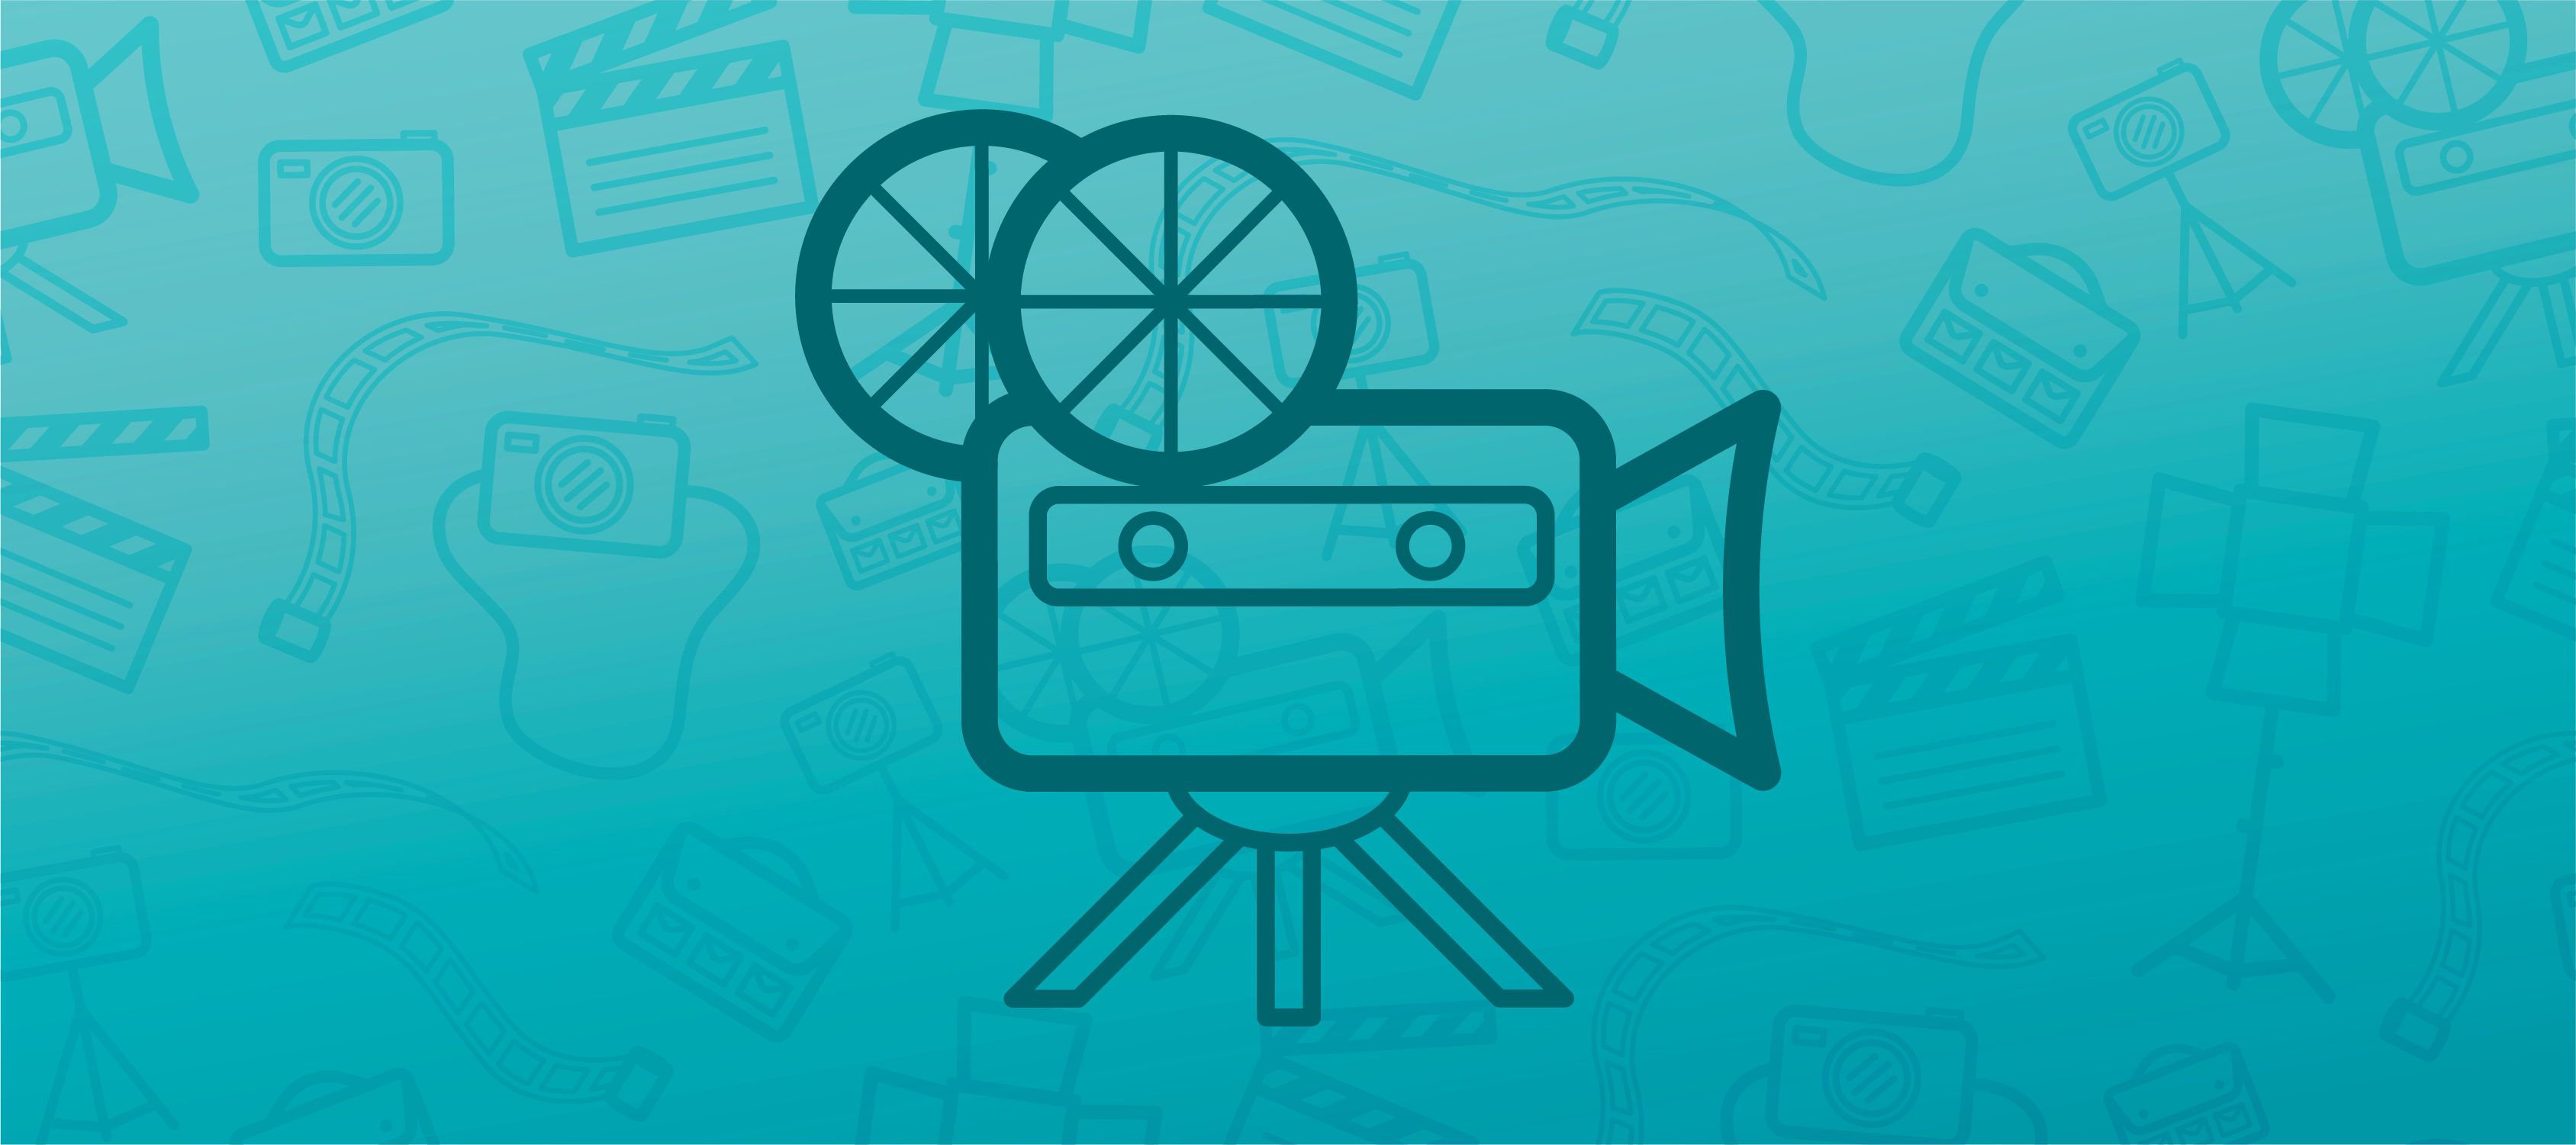 A blue header image featuring an icon of a film camera in the center and faded videography icons in the background